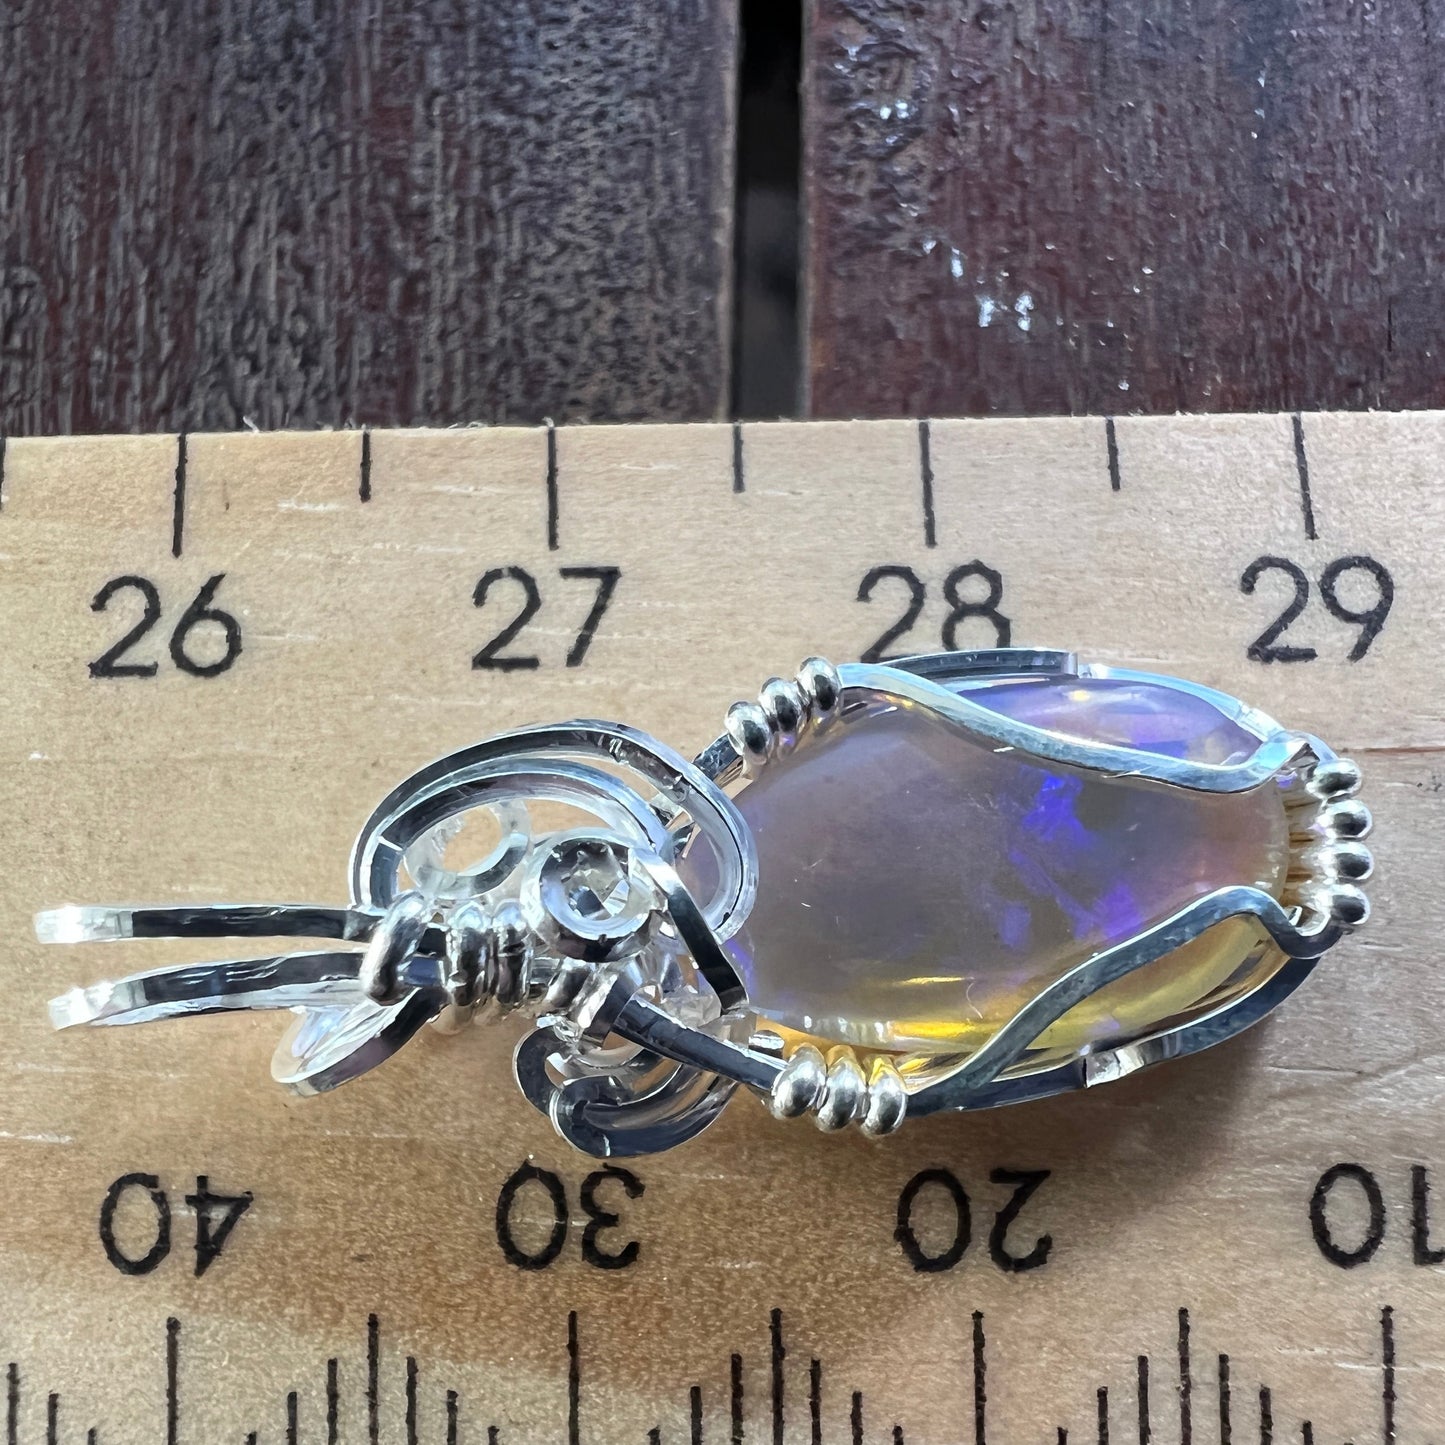 Beautifully cut Lightning Ridge Jelly Crystal opal. Cut and polished by Bill Johnson. Expertly set in a unique silver wire wrap. An awesome hand made gift.